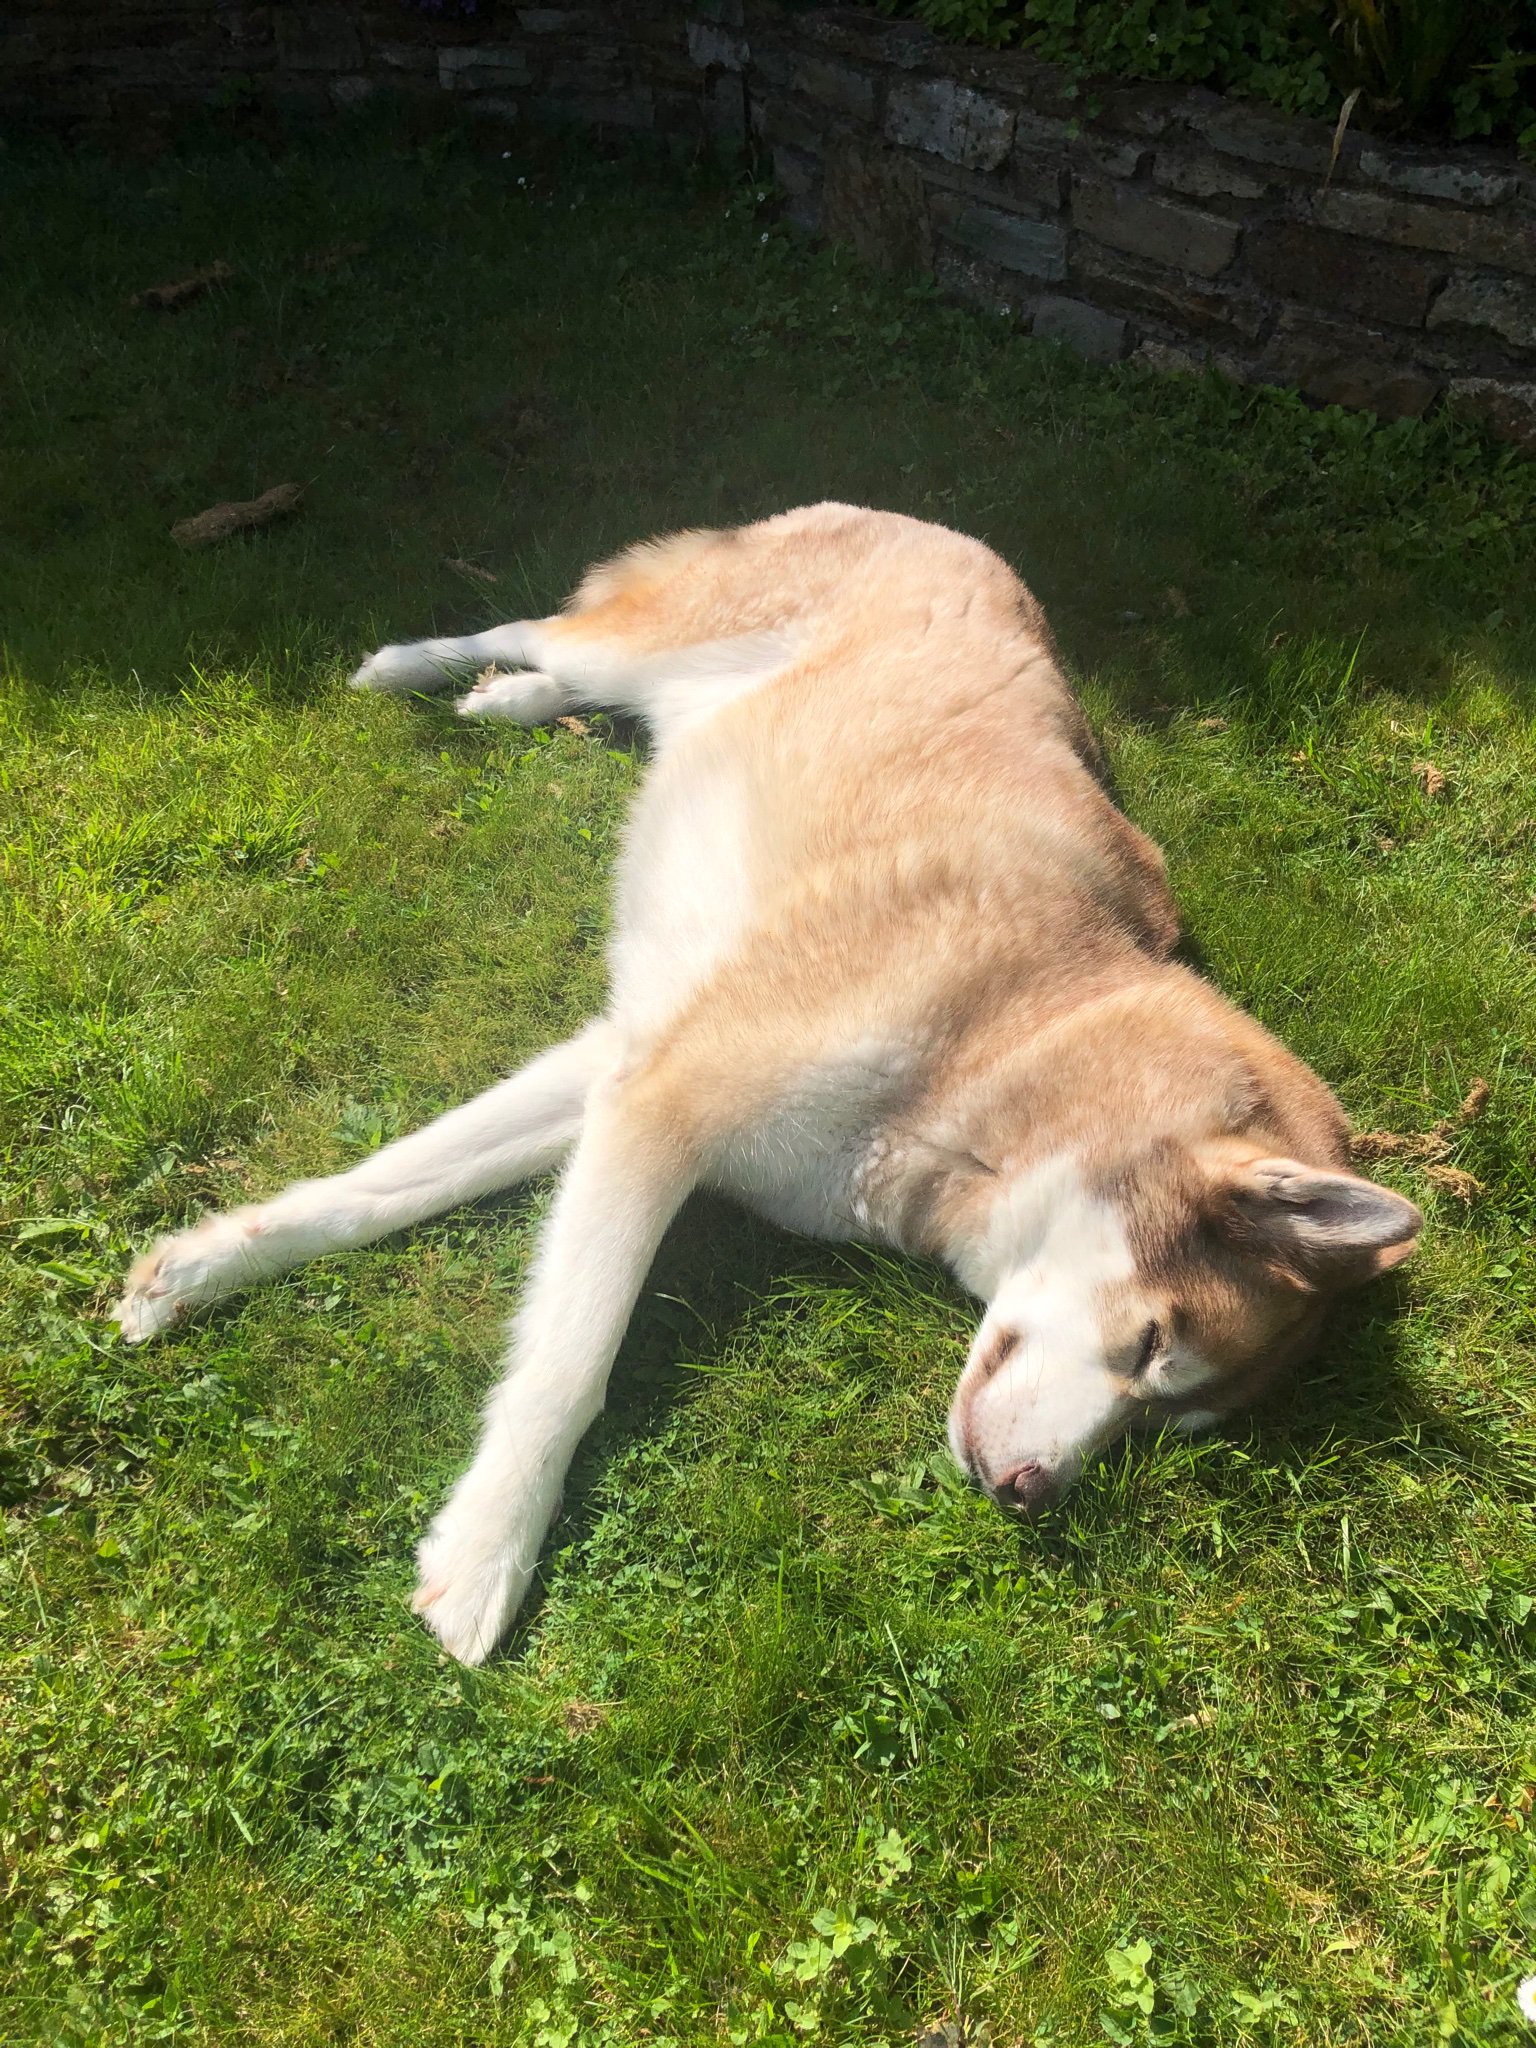 Oskar the huskamute lying stretched out in the sun.